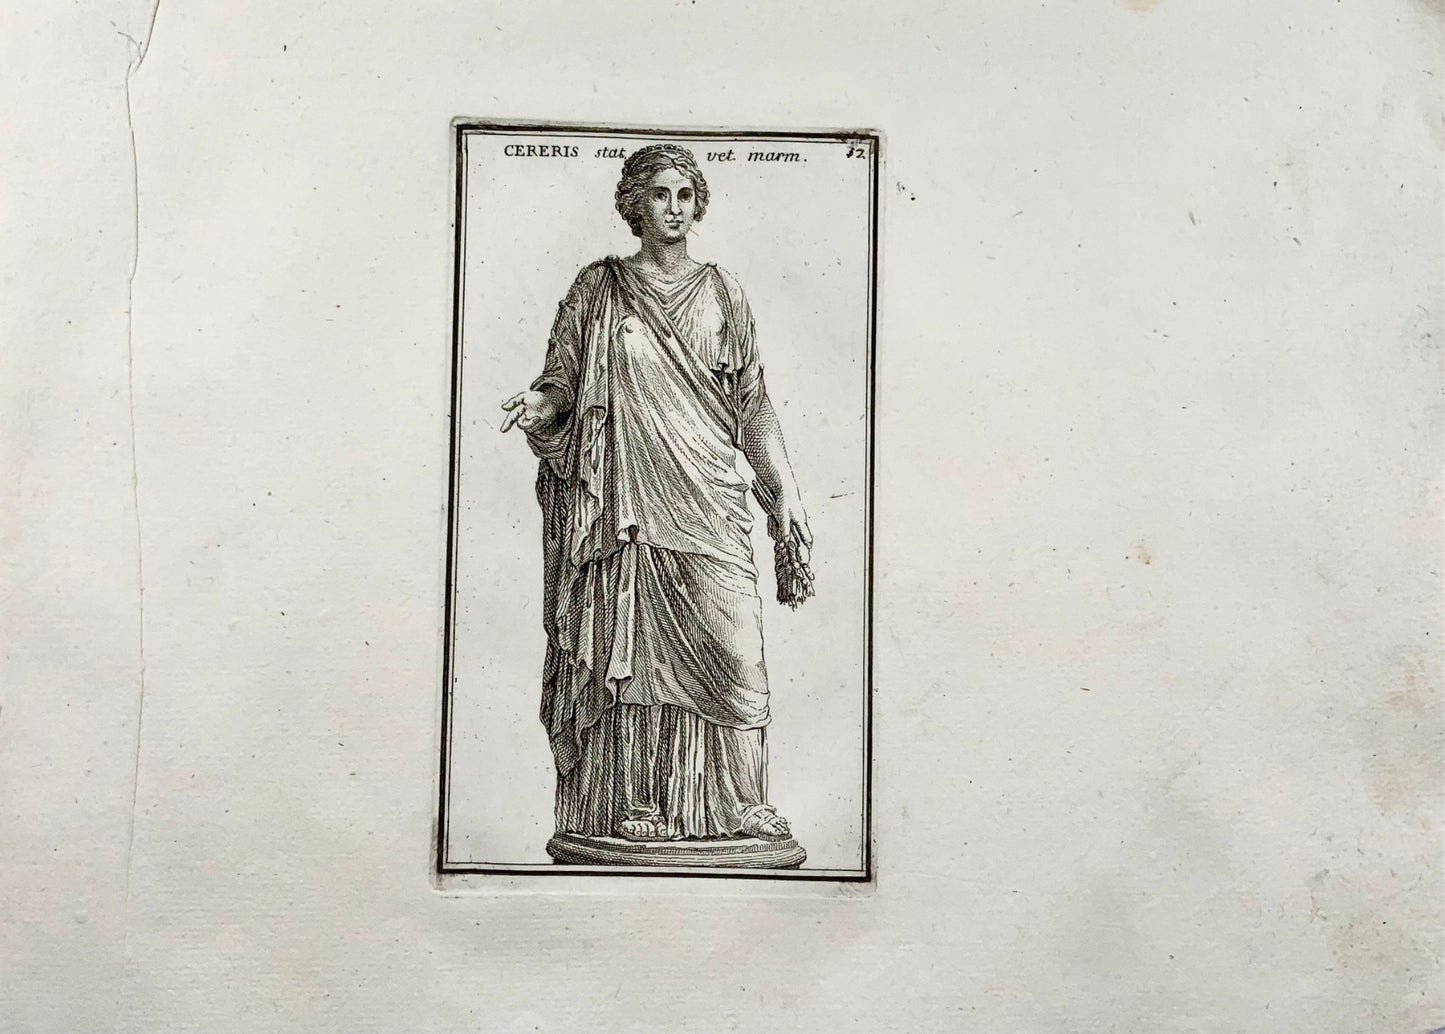 1779 Statue of Ceres, God of Agriculture, engraving, "Calcografia di Roma"